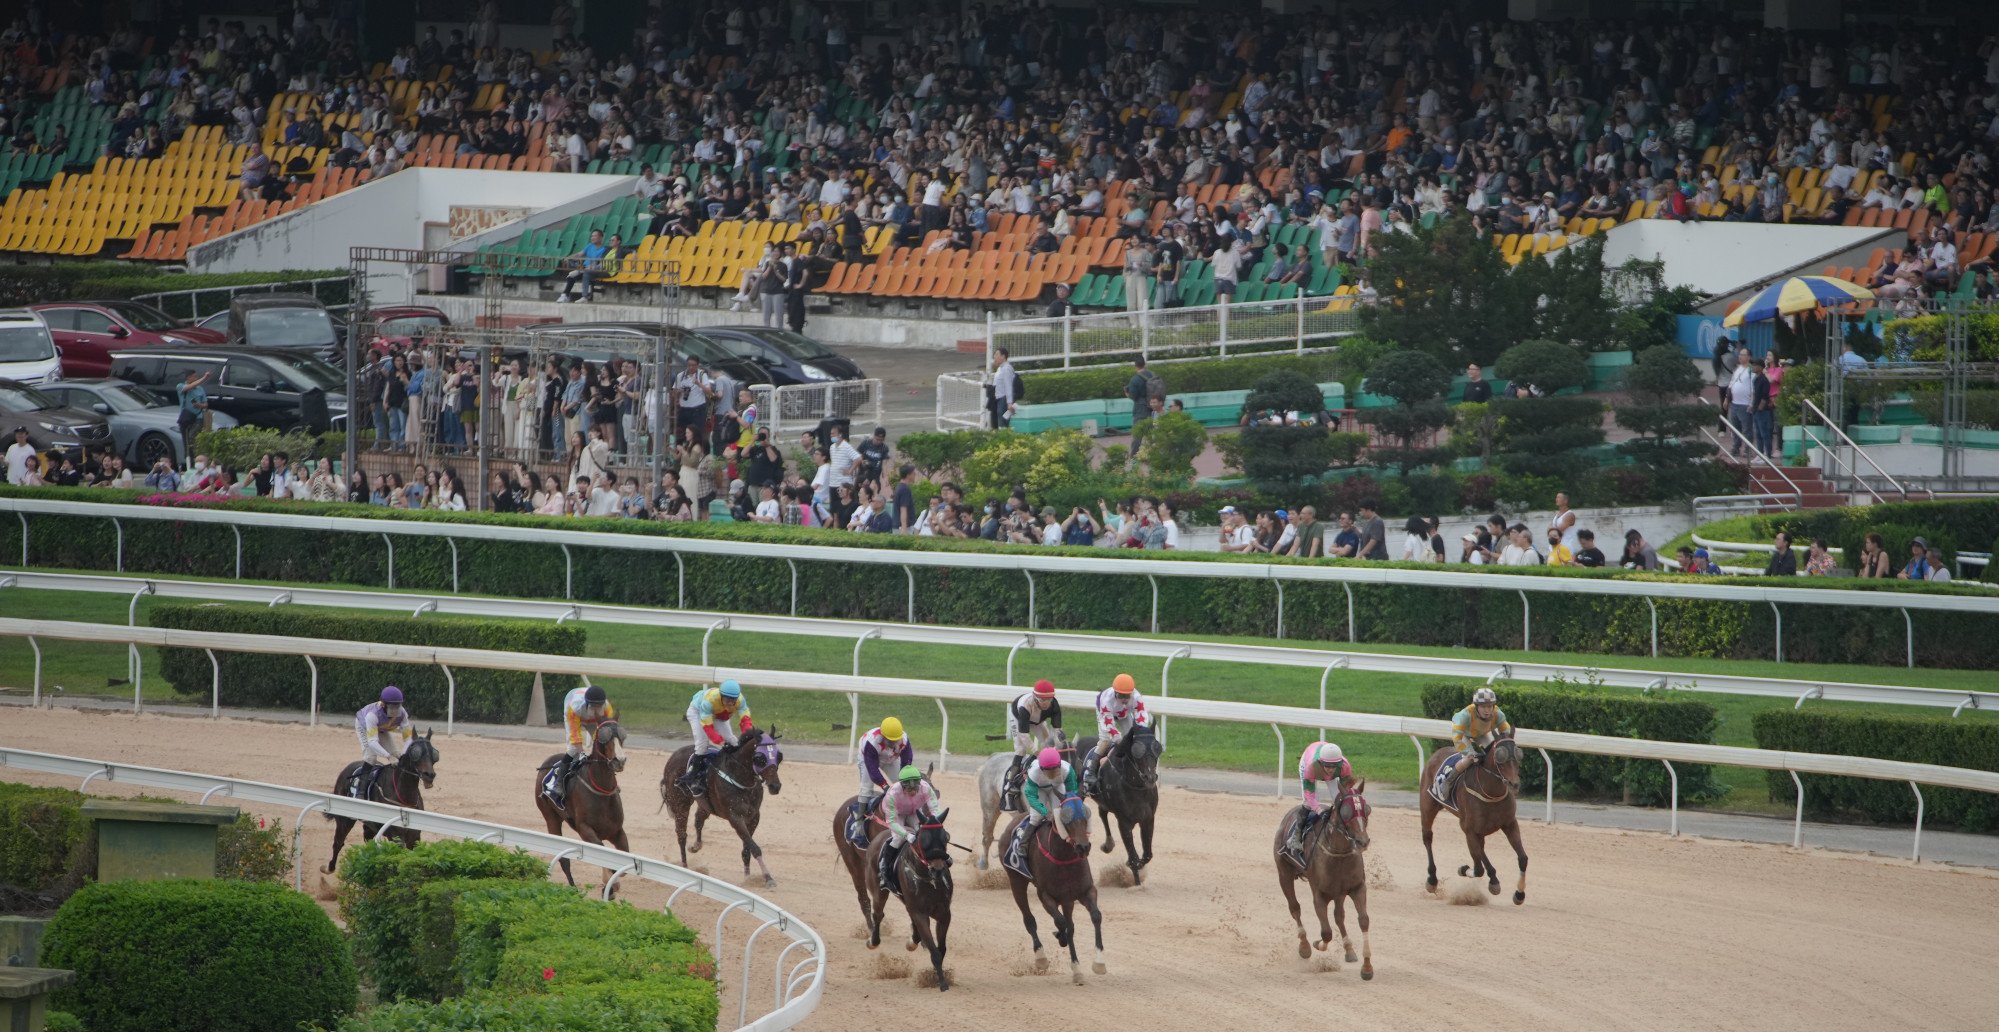 A bumper crowd watches on as Macau hosts its last race meeting on Saturday. Photo: Eugene Lee